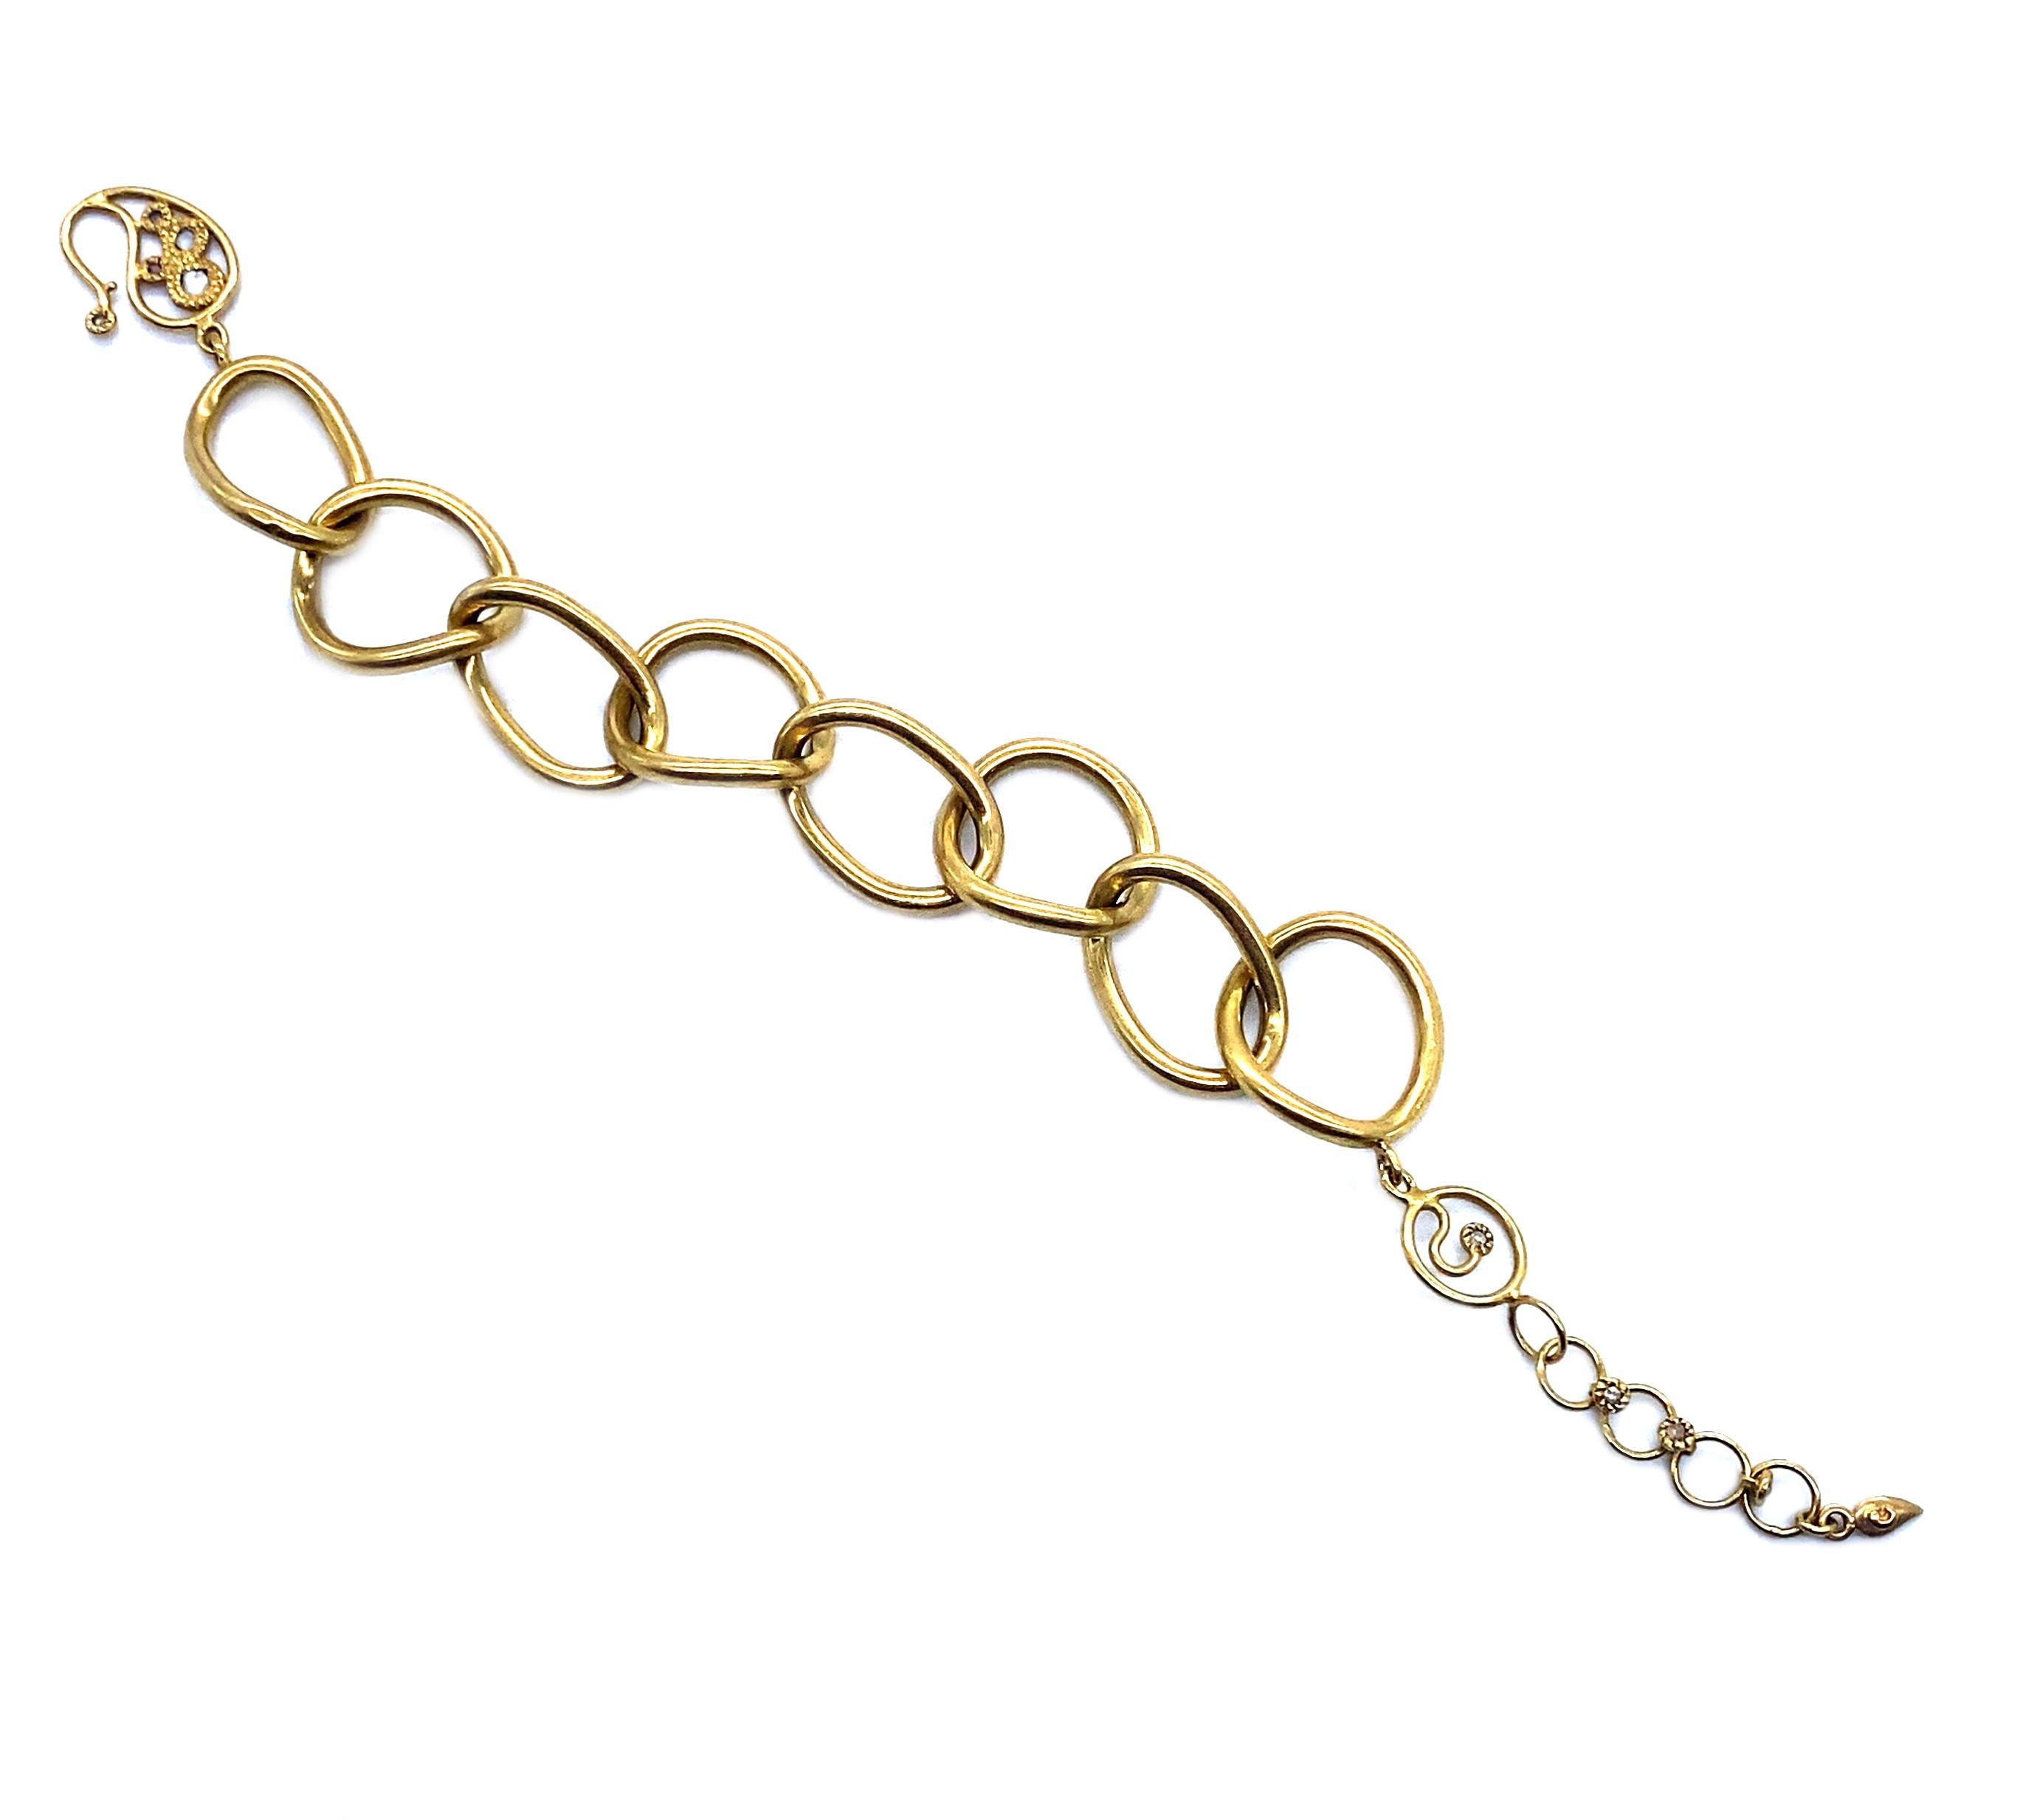 Antique 20 Karat Yellow Gold Bracelet with Round, Large Huggy Hoops and Set With 0.31 Carat Diamonds. The Links Are Solid Gold And The Bracelet Measure 7 Inches In Length. 